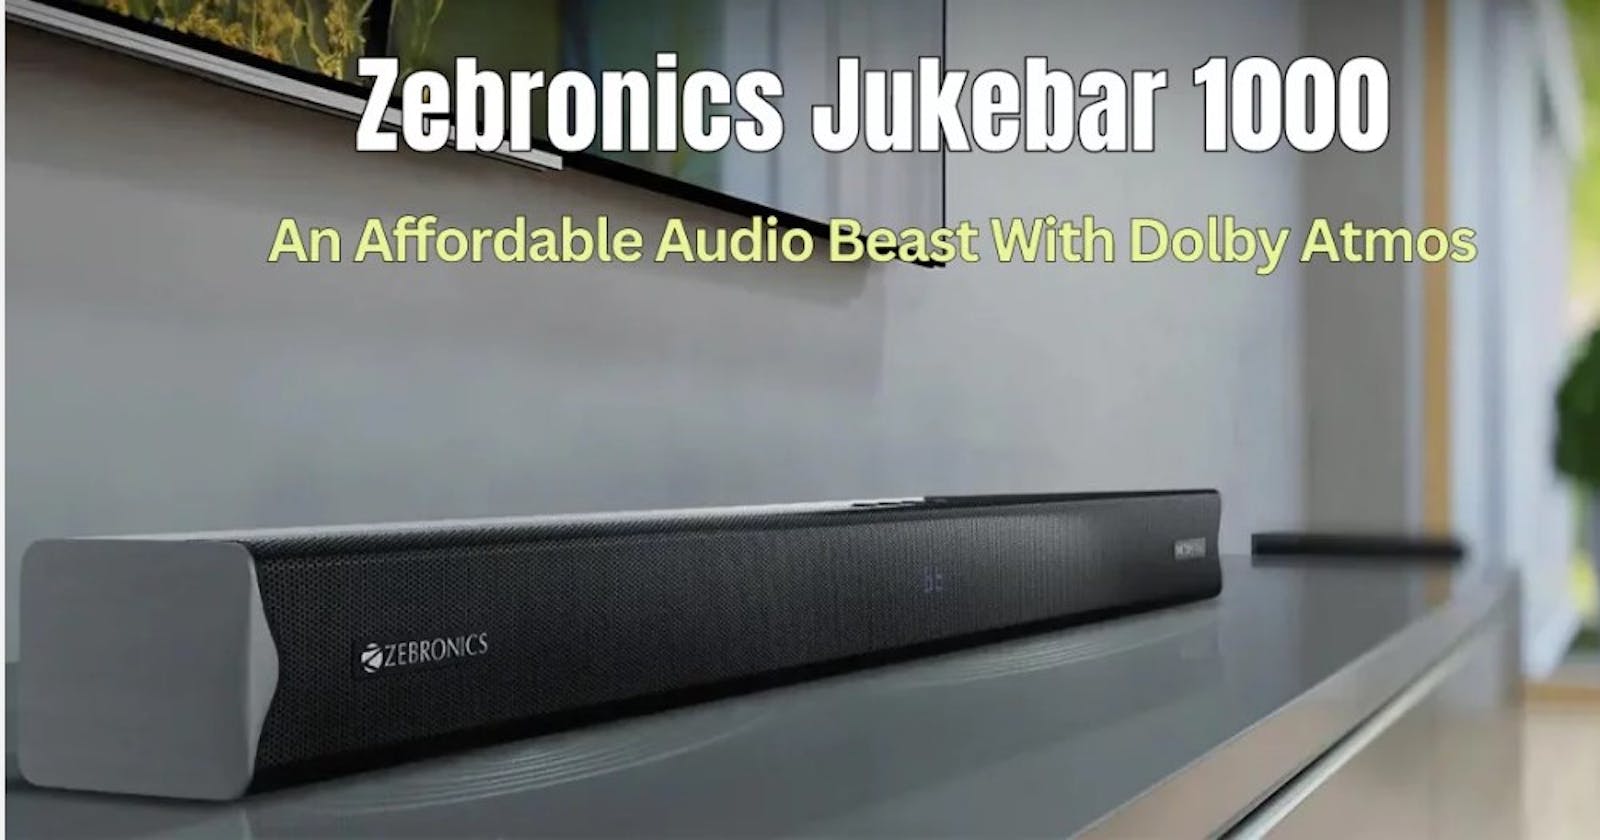 Zebronics Jukebar 1000: A Review You Can’t Miss!